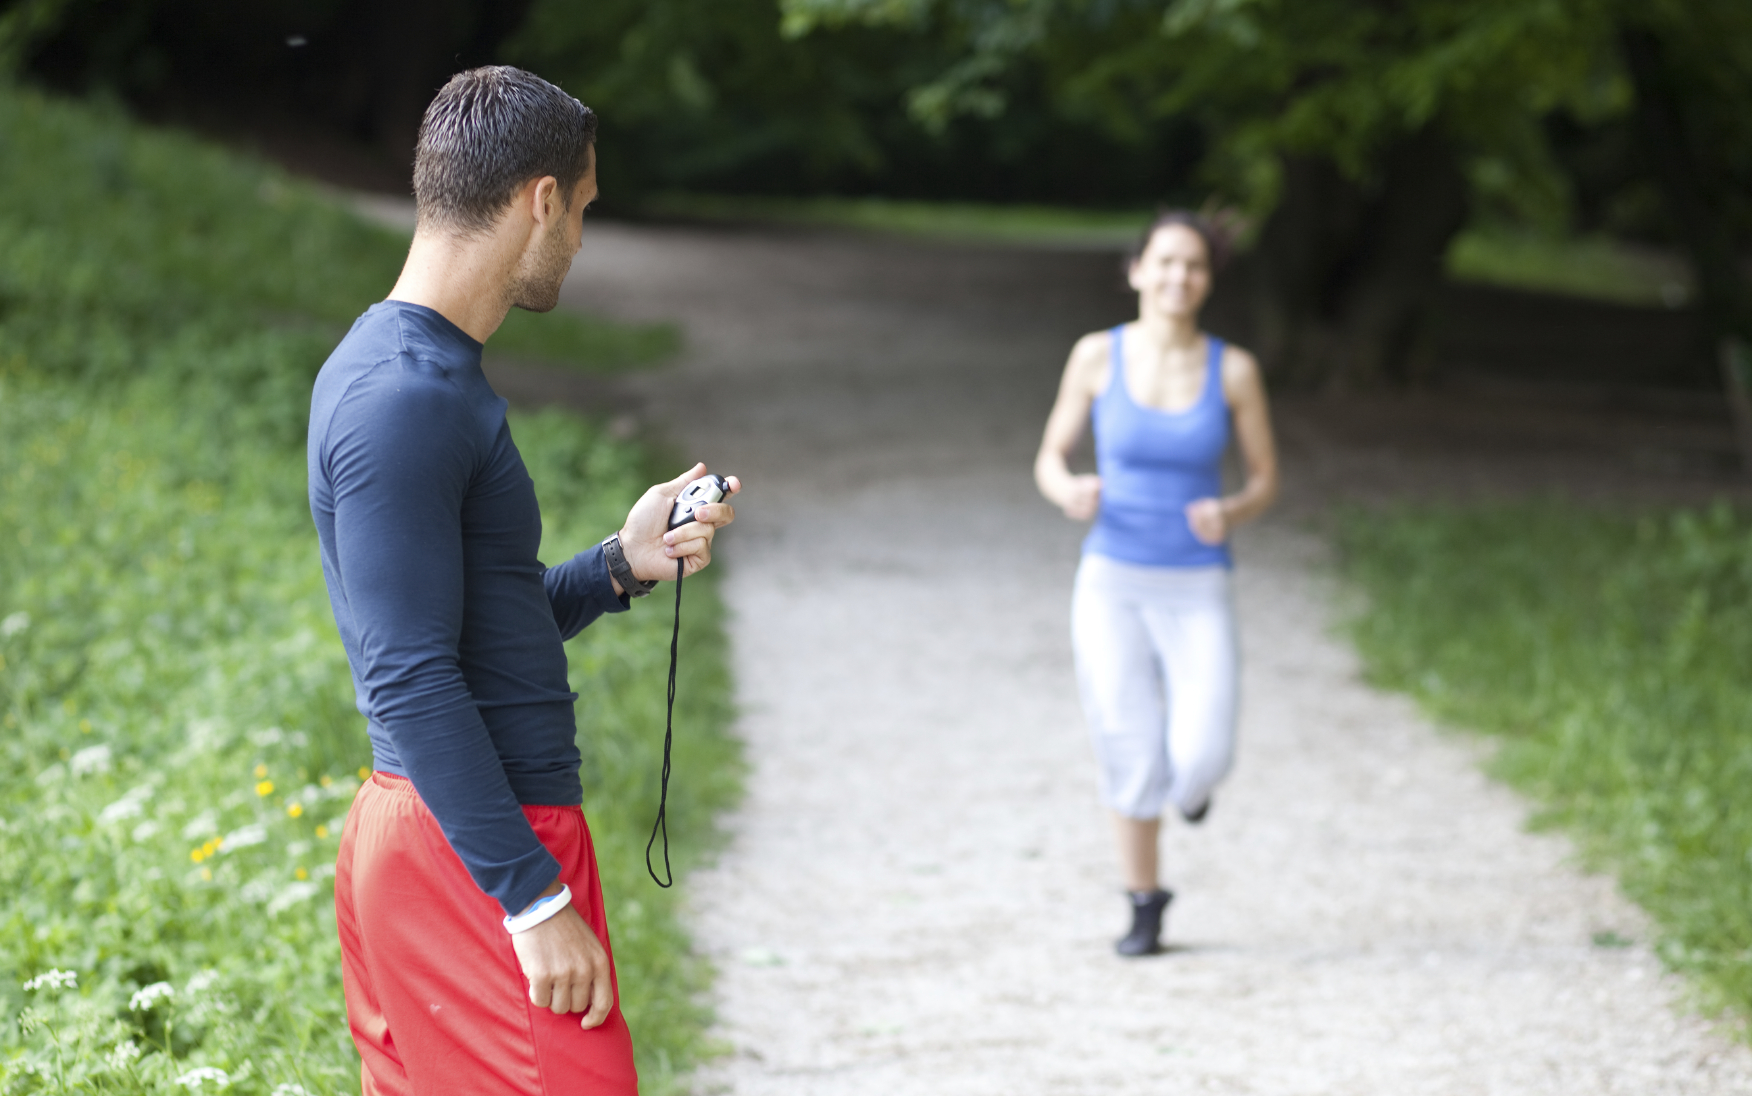 Personal trainer timing a female runner. Selective focus.